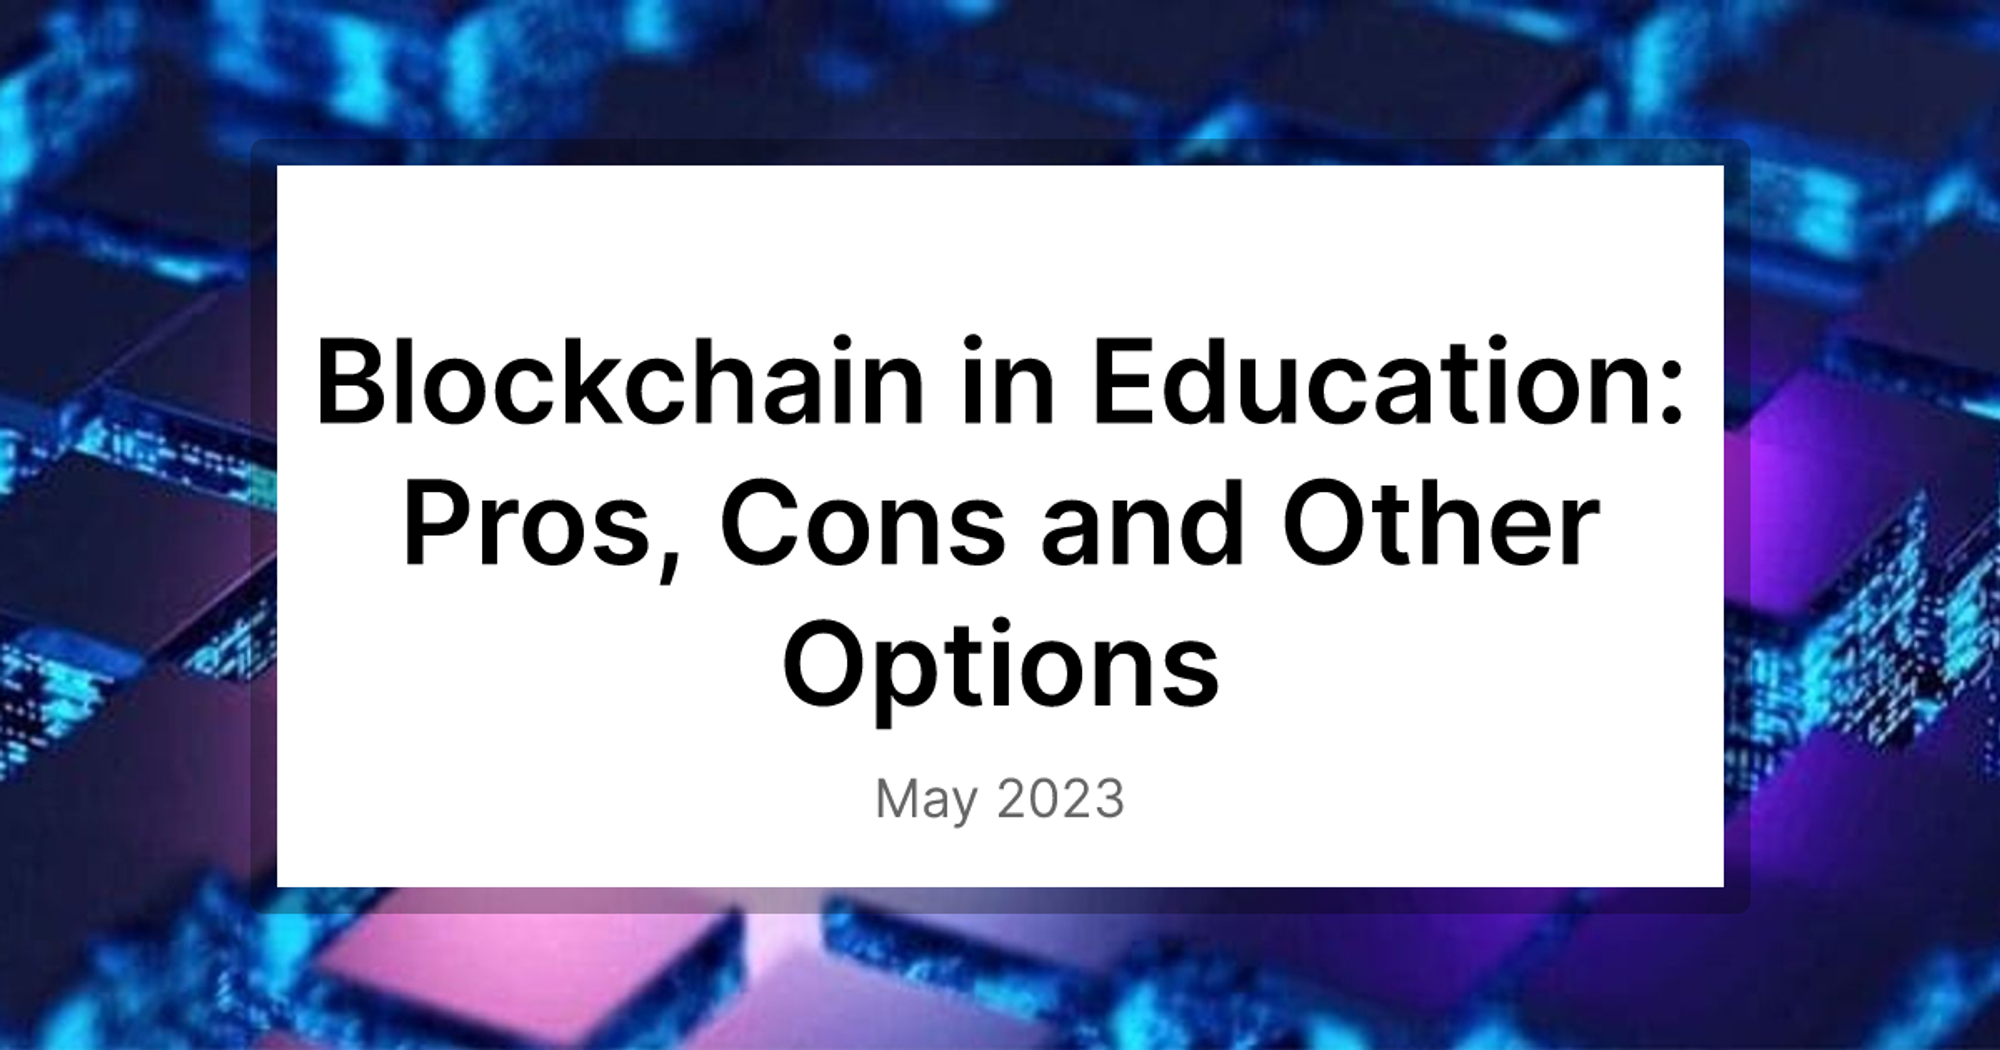 Blockchain in Education: Pros, Cons and Other Options